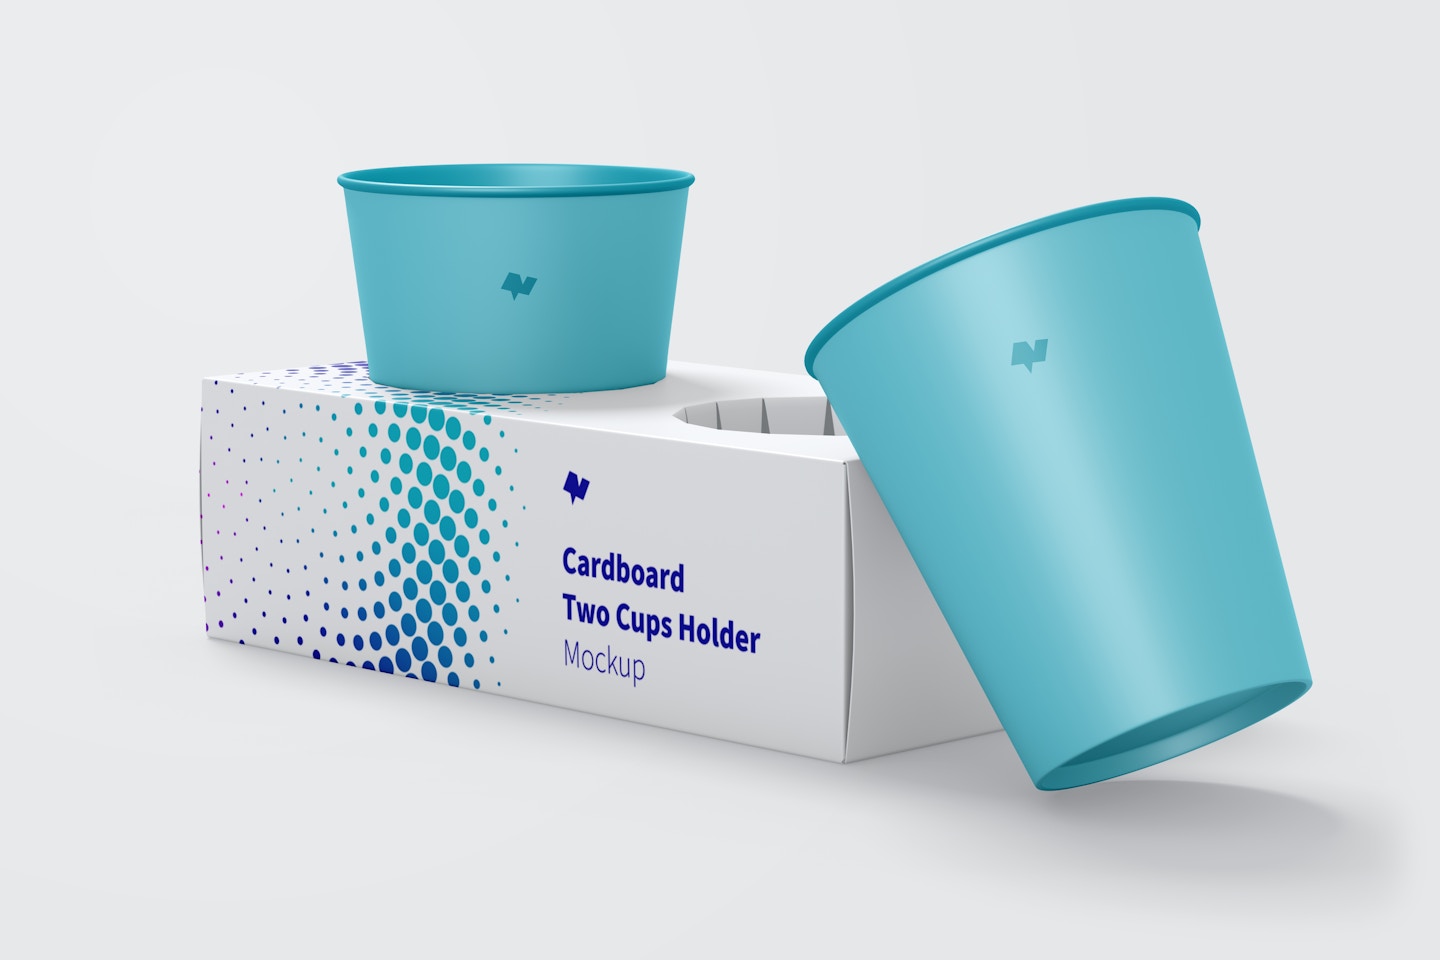 Cardboard Two Cups Holder Mockup, Side View